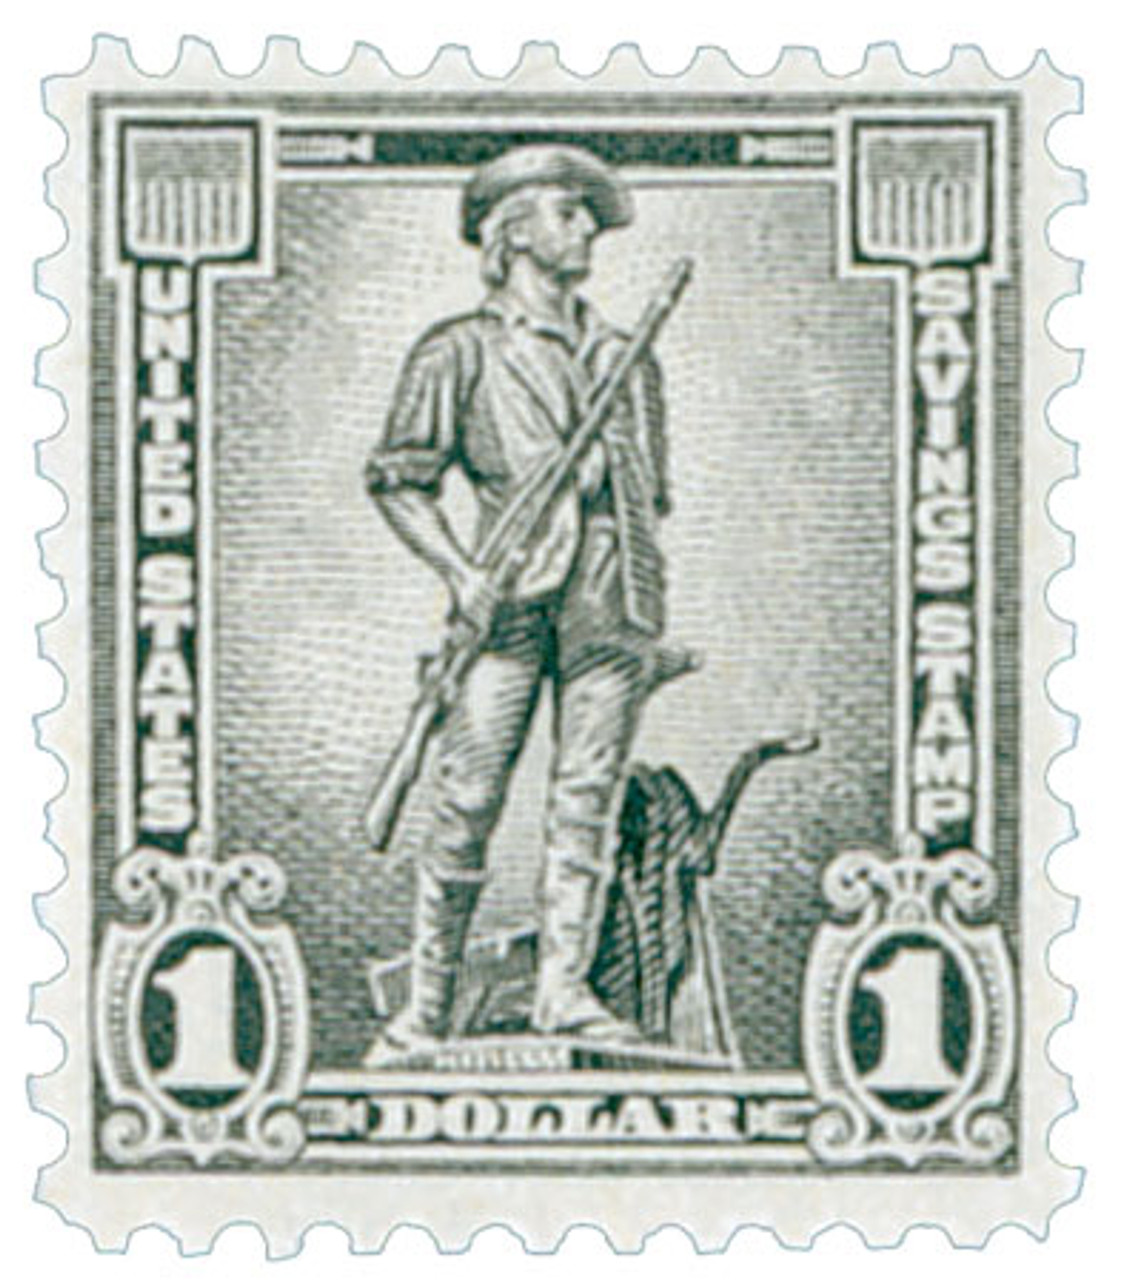 Official United States Savings Stamp Album - The Portal to Texas History